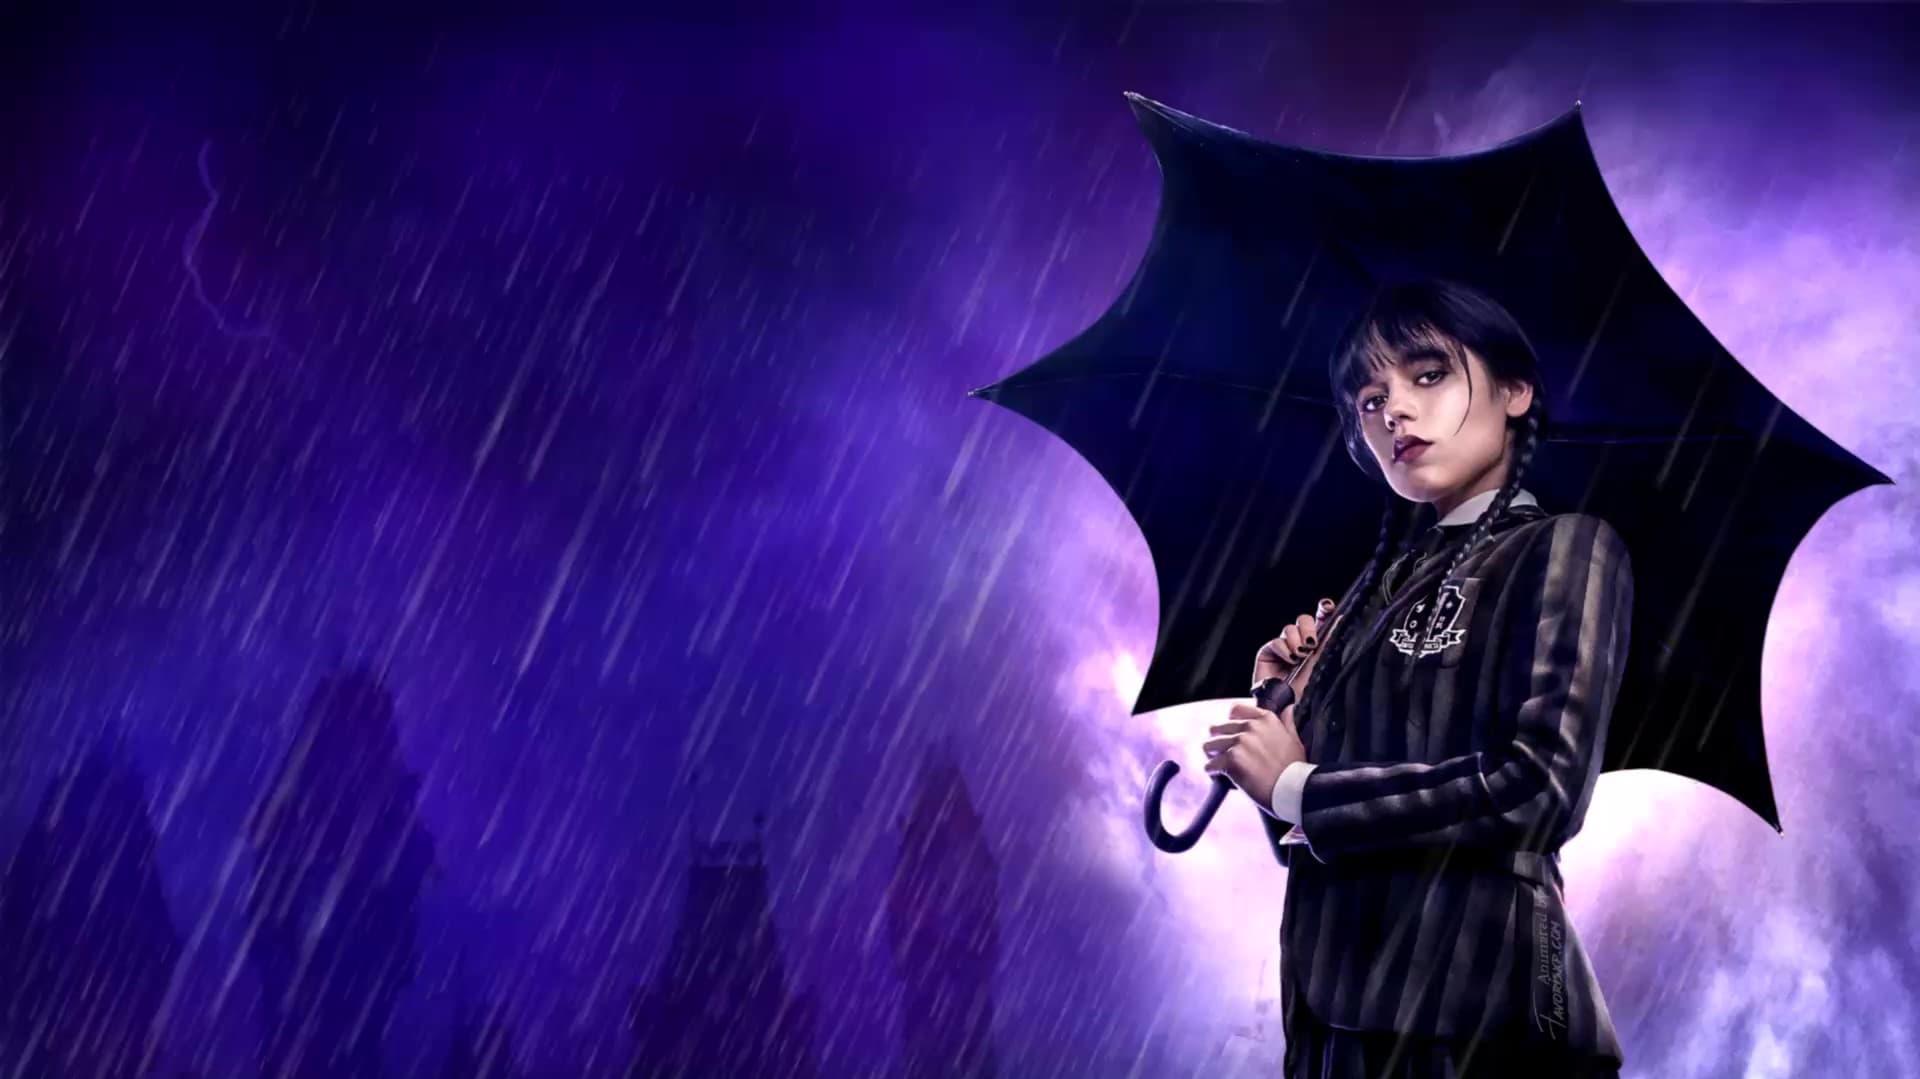 Wednesday Addams Flix Animated Wallpaper By Favorisxp On